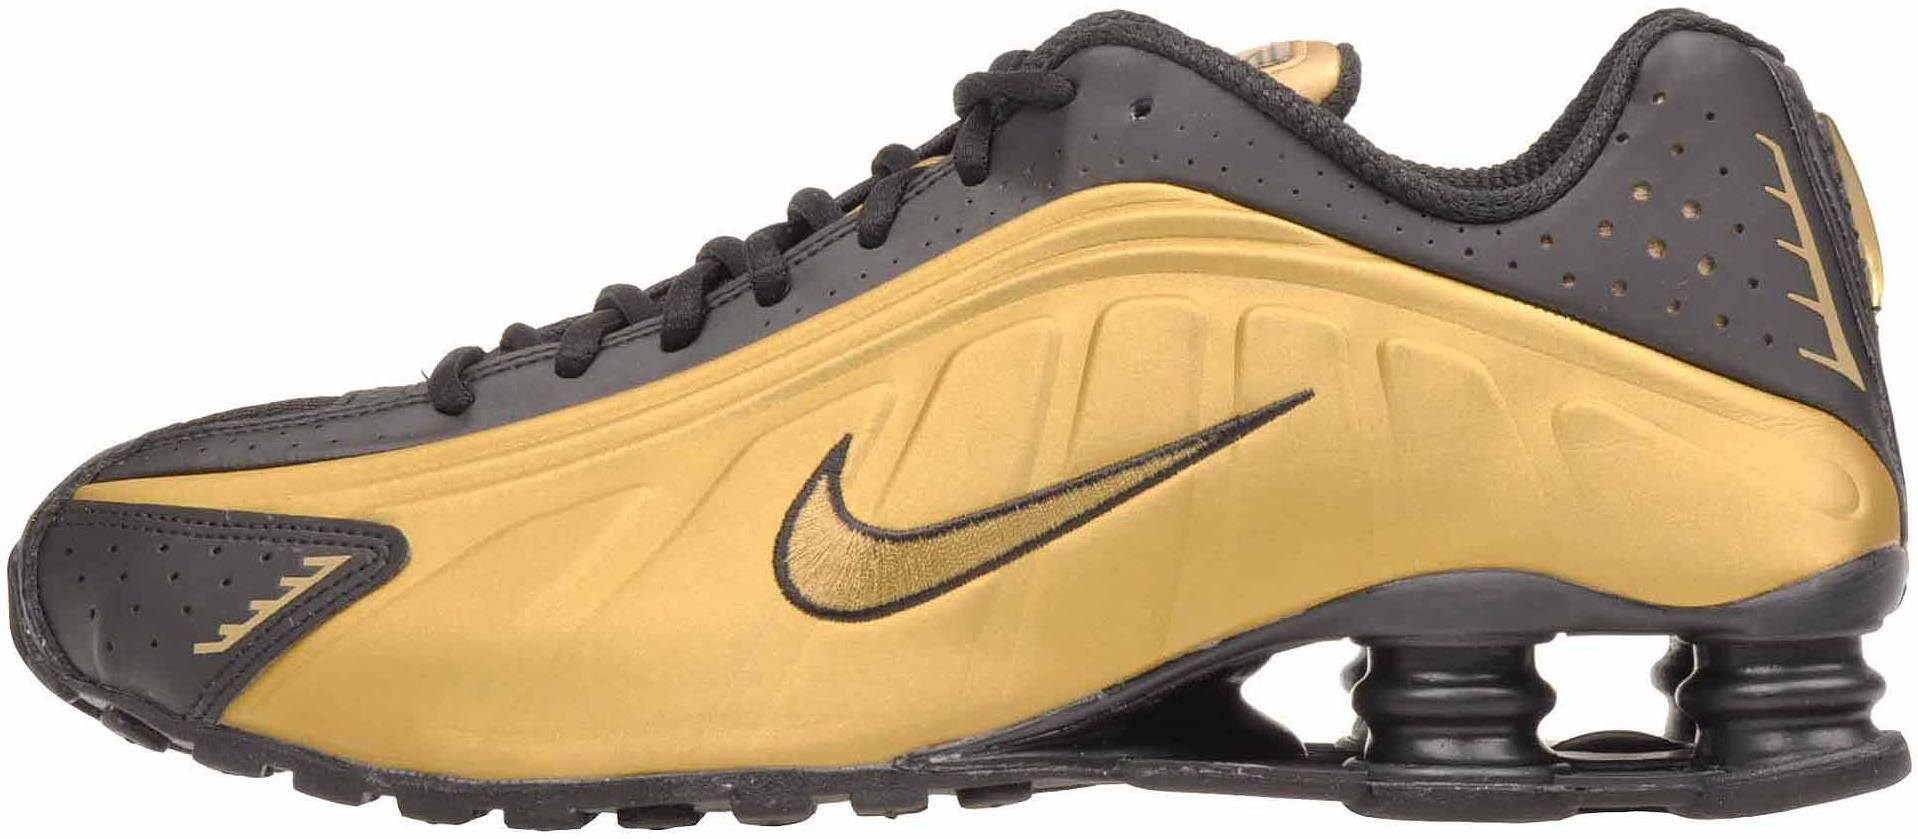 nike trainers gold